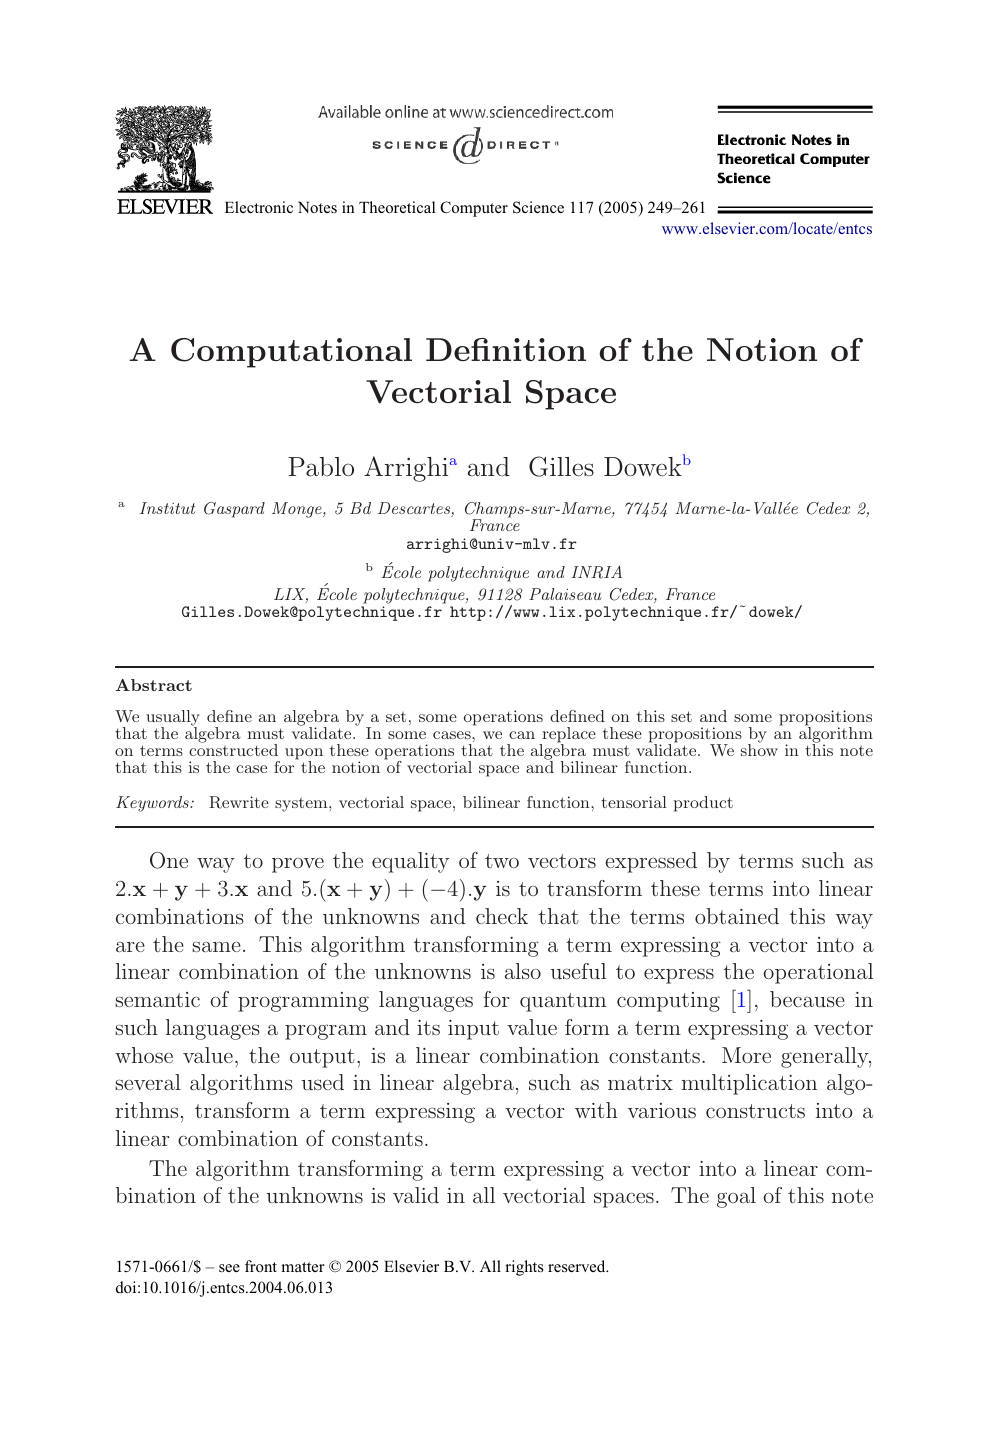 A Computational Definition Of The Notion Of Vectorial Space Topic Of Research Paper In Computer And Information Sciences Download Scholarly Article Pdf And Read For Free On Cyberleninka Open Science Hub